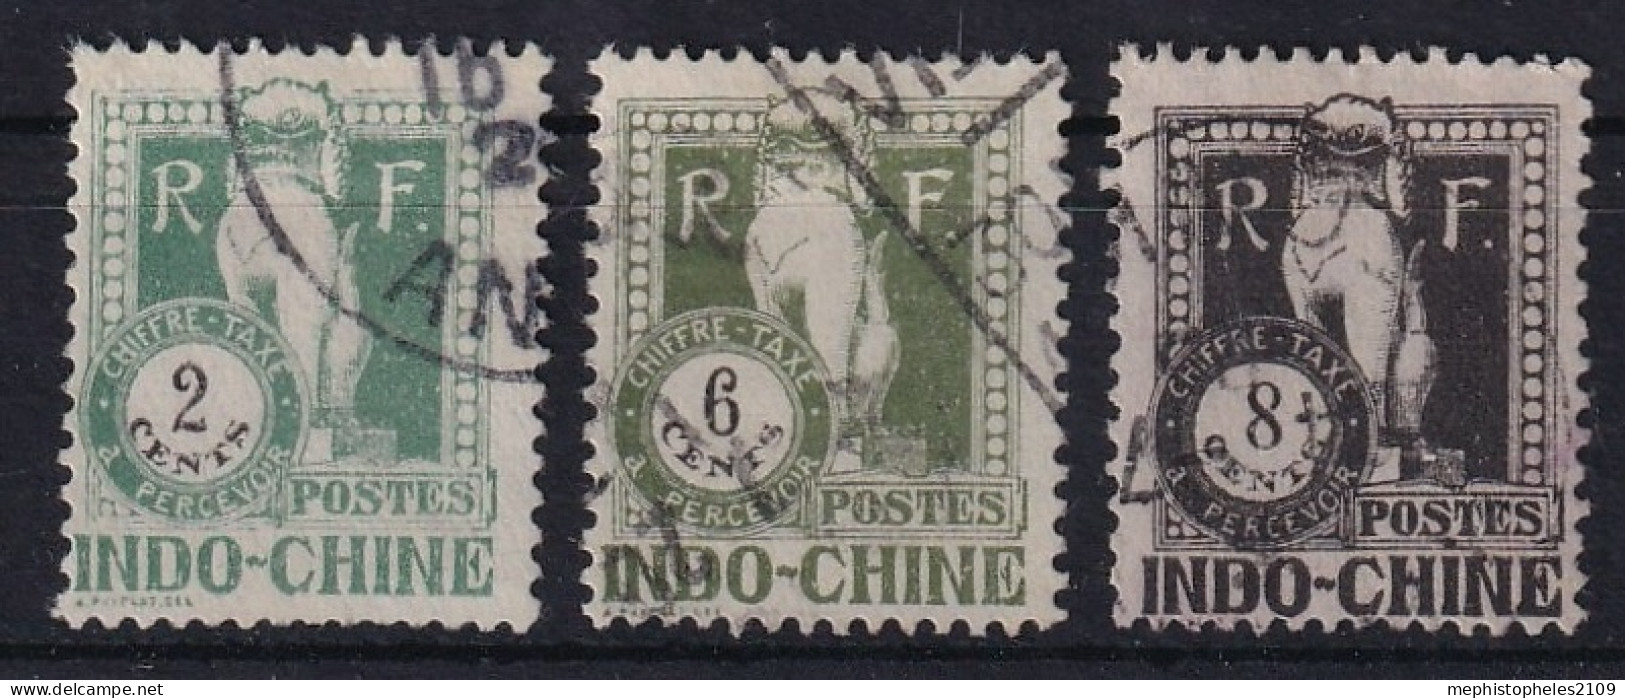 INDOCHINE 1922 - Canceled - YT 34, 37, 38 - Chiffre Taxe - Postage Due